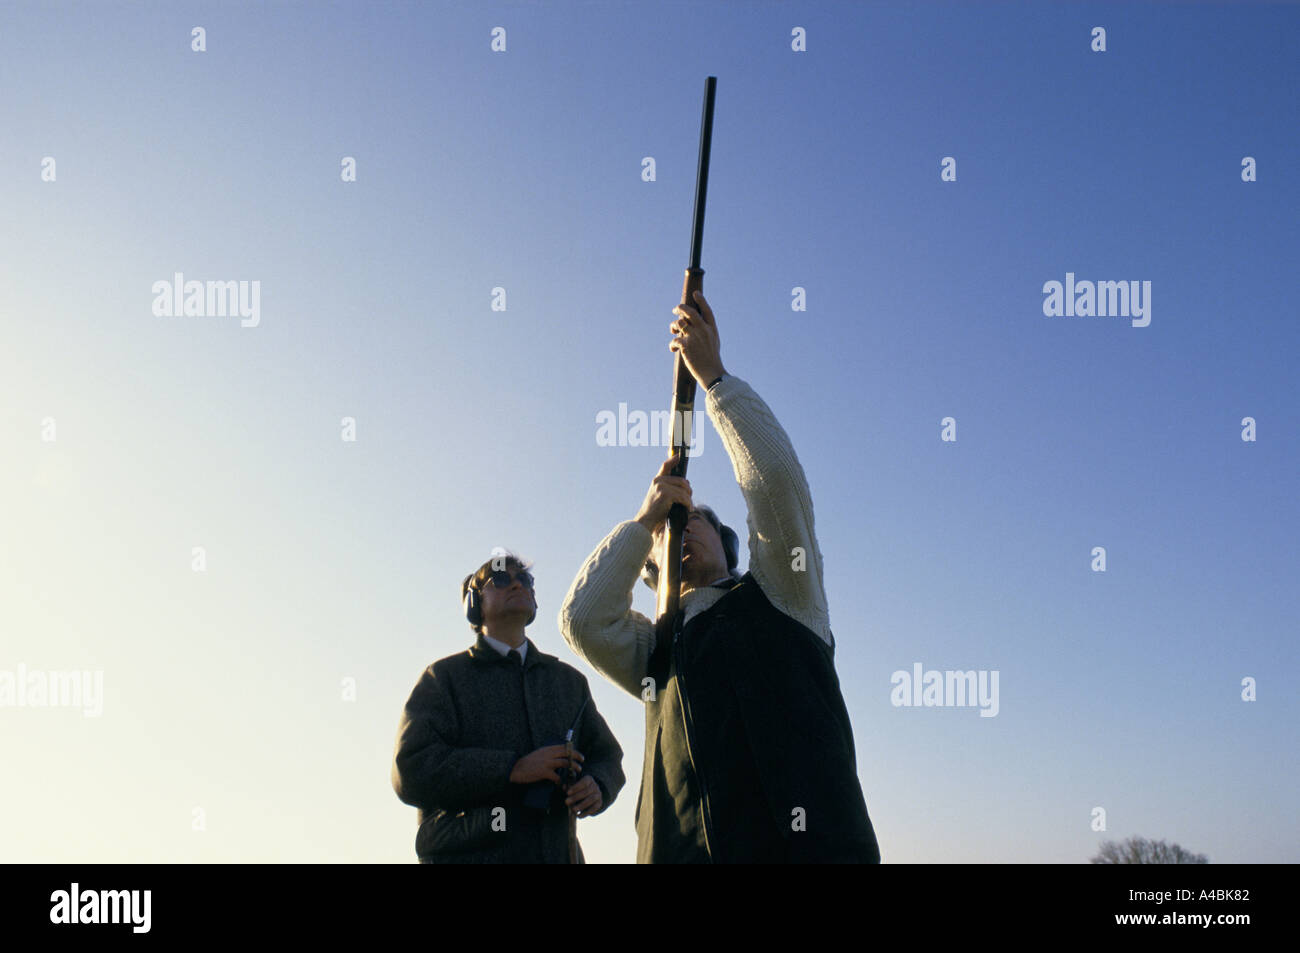 CLAY PIGEON SHOOTING, AIMING SHOTGUN INTO CLEAR BLUE SKY, ENGLAND, 1990 Stock Photo